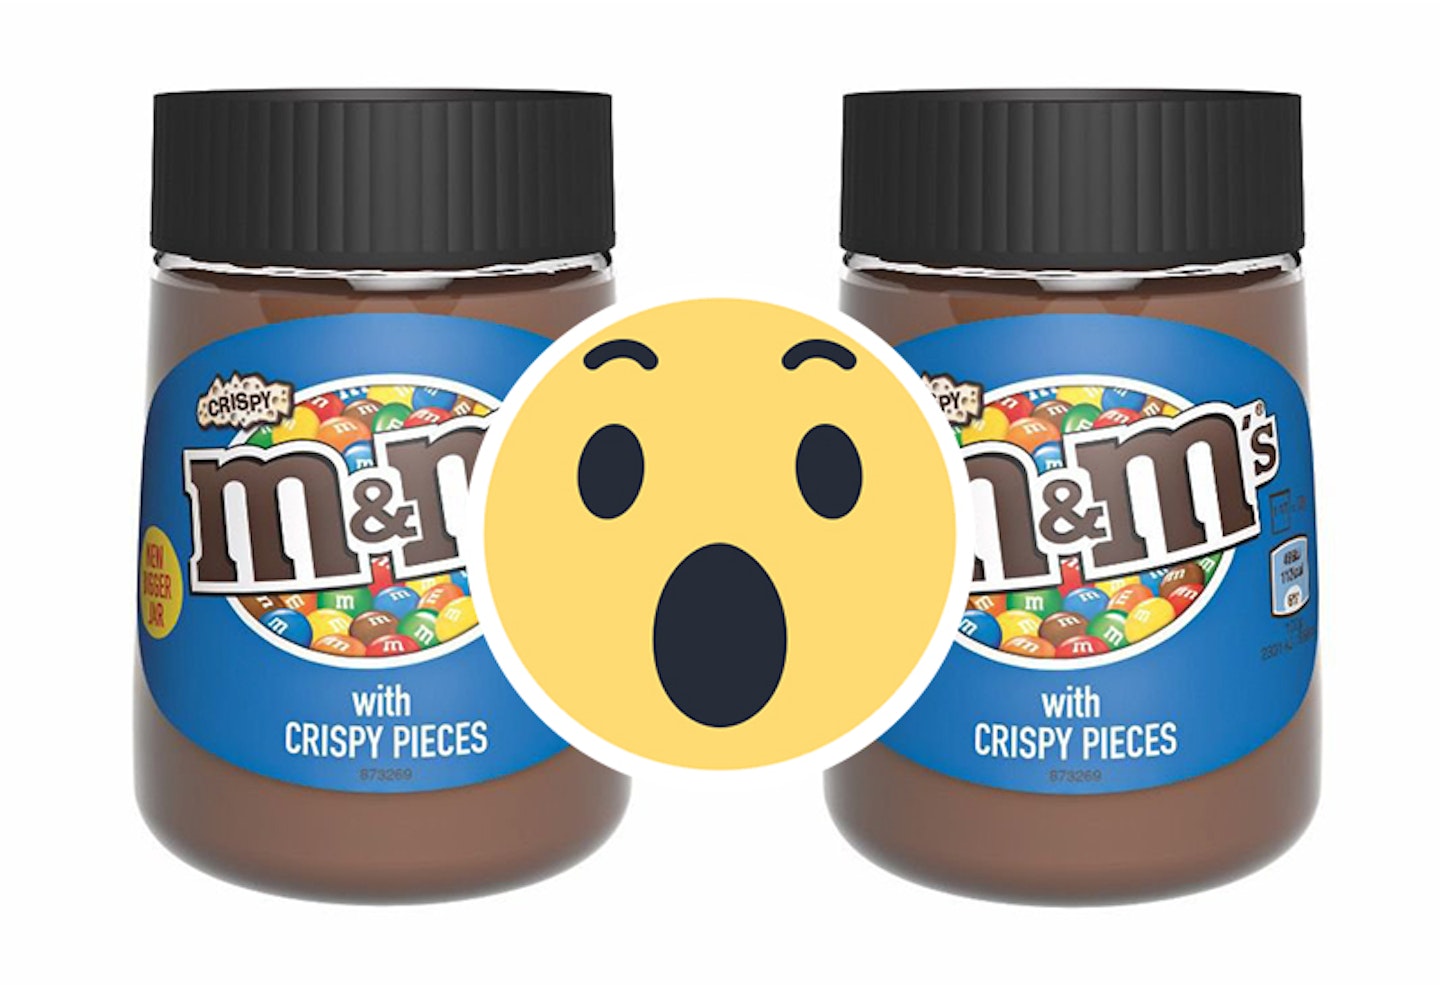 Mums stop what you’re doing – the Crispy M&Ms chocolate spread is here and it looks AMAZING!